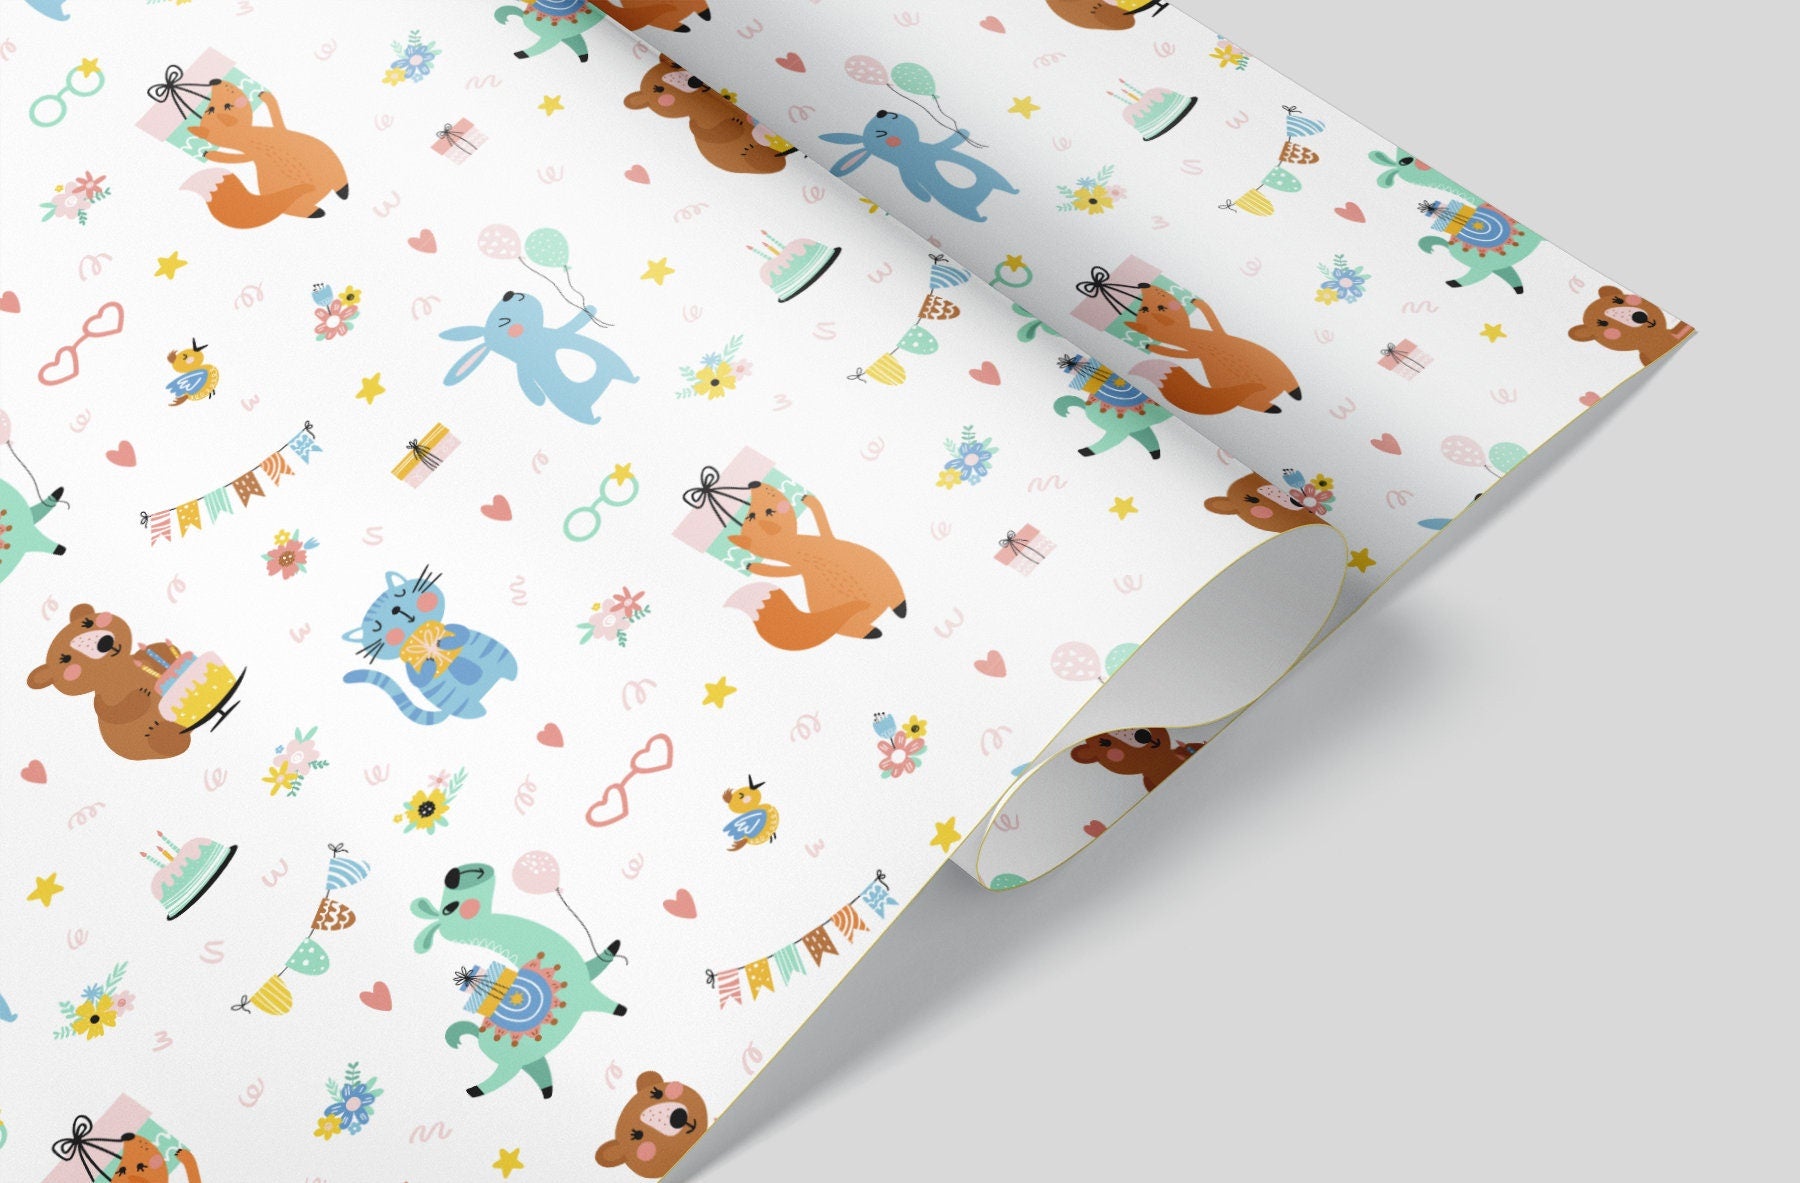 Purple Woodland Wrapping Paper by Autumn Woodland